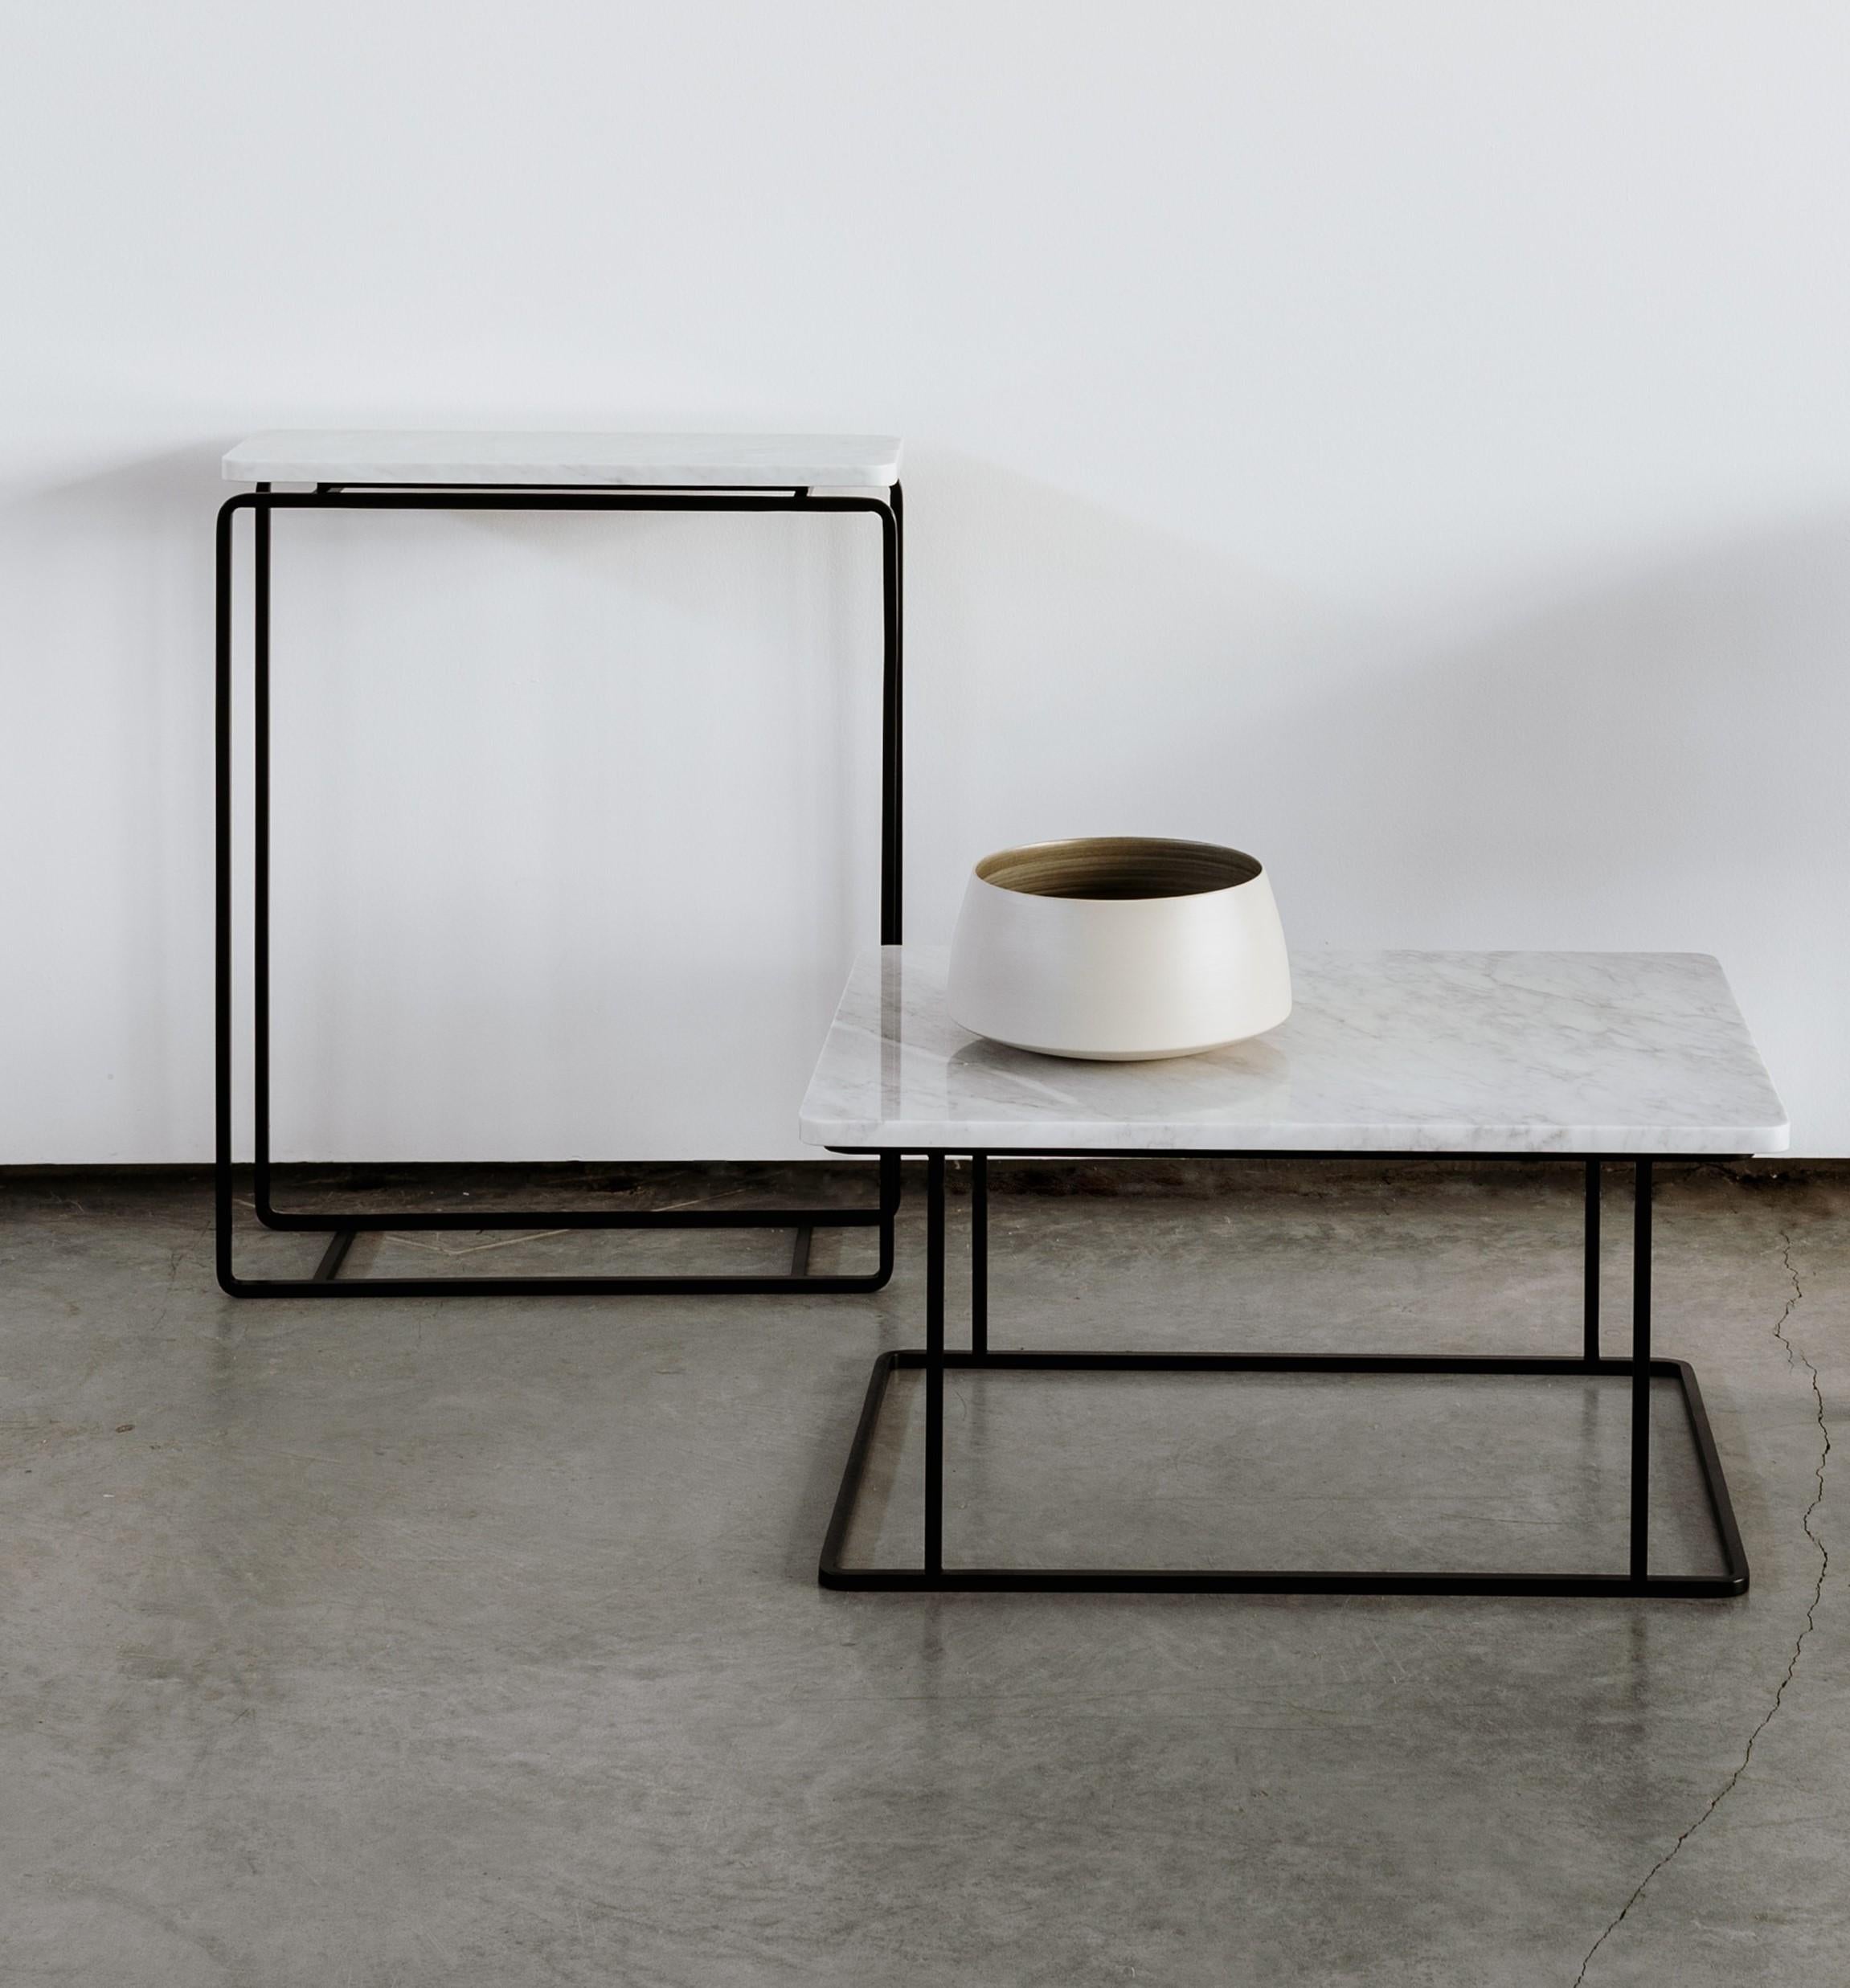 Set of 2 Form B coffee table and Form C console by Un’common
Dimensions: W 75 x D 55 x H 35 cm / W 80 x D 20 x H 73 cm.
Materials: carrara marble
Available in 3 marbles: carrara, Nero Marquina and Flor di Bosco.

FORM is about rounded corners